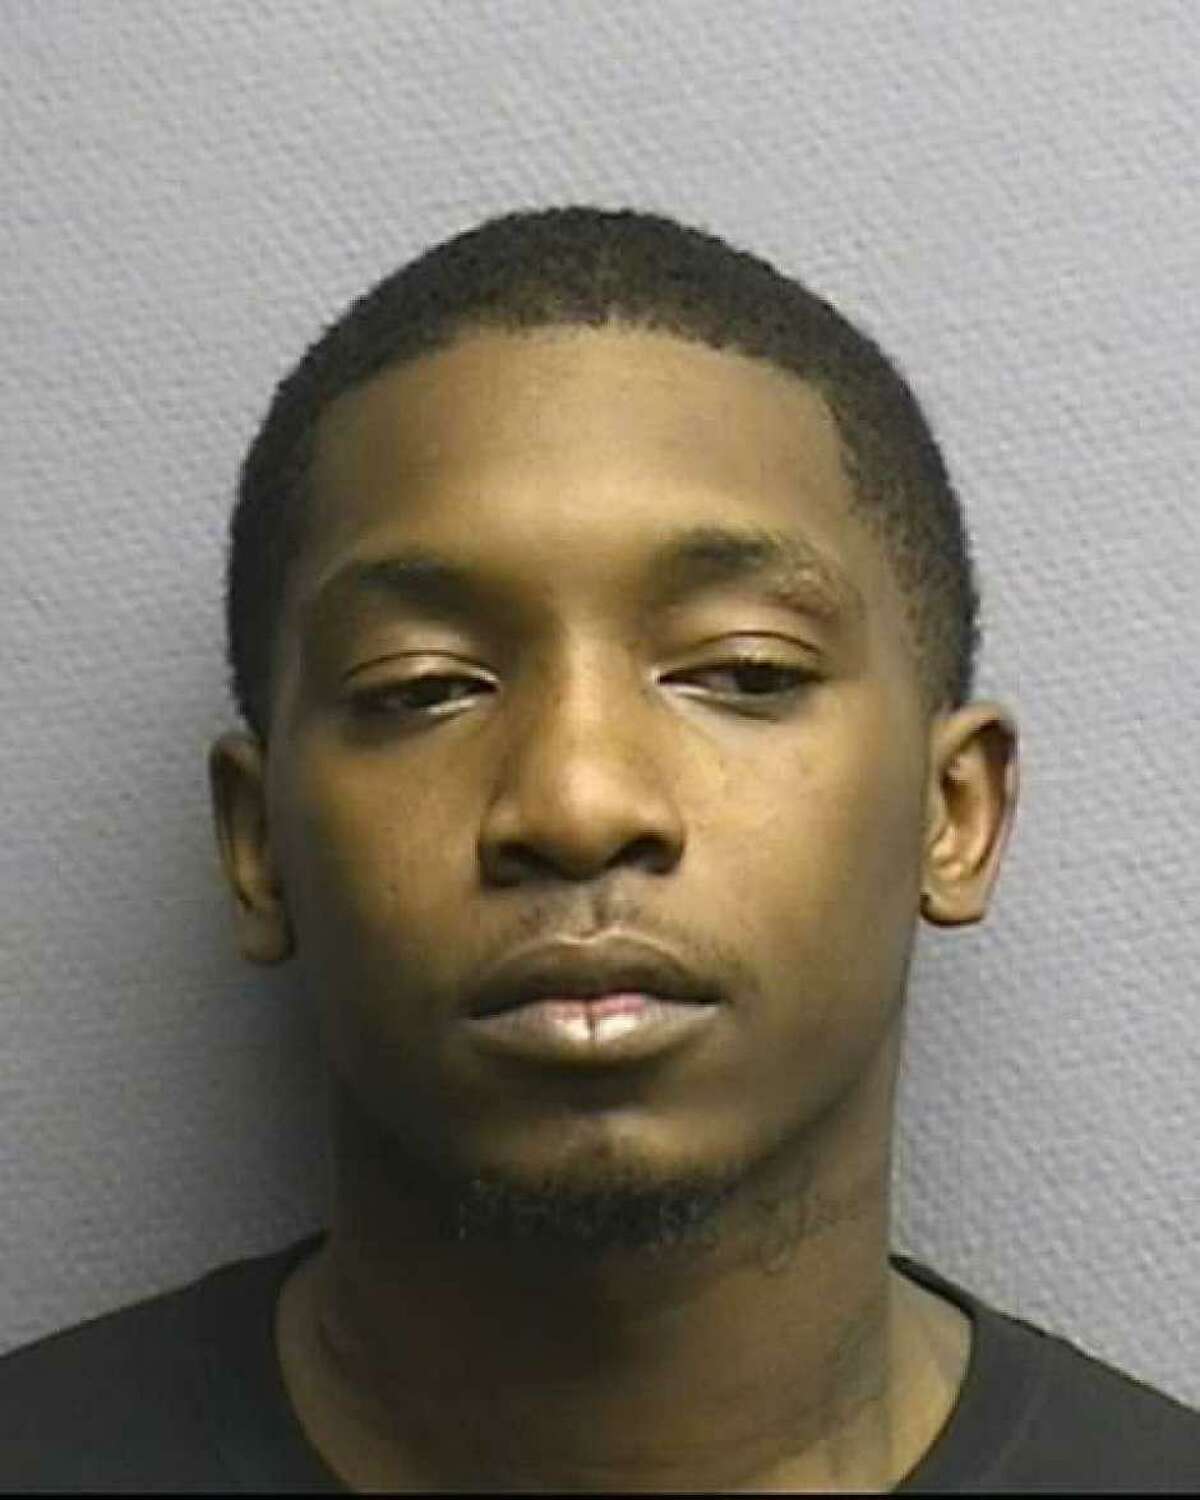 Trevien Thomas was arrested in 2017 for soliciting prostitution for a 14-year-old girl in Houston.